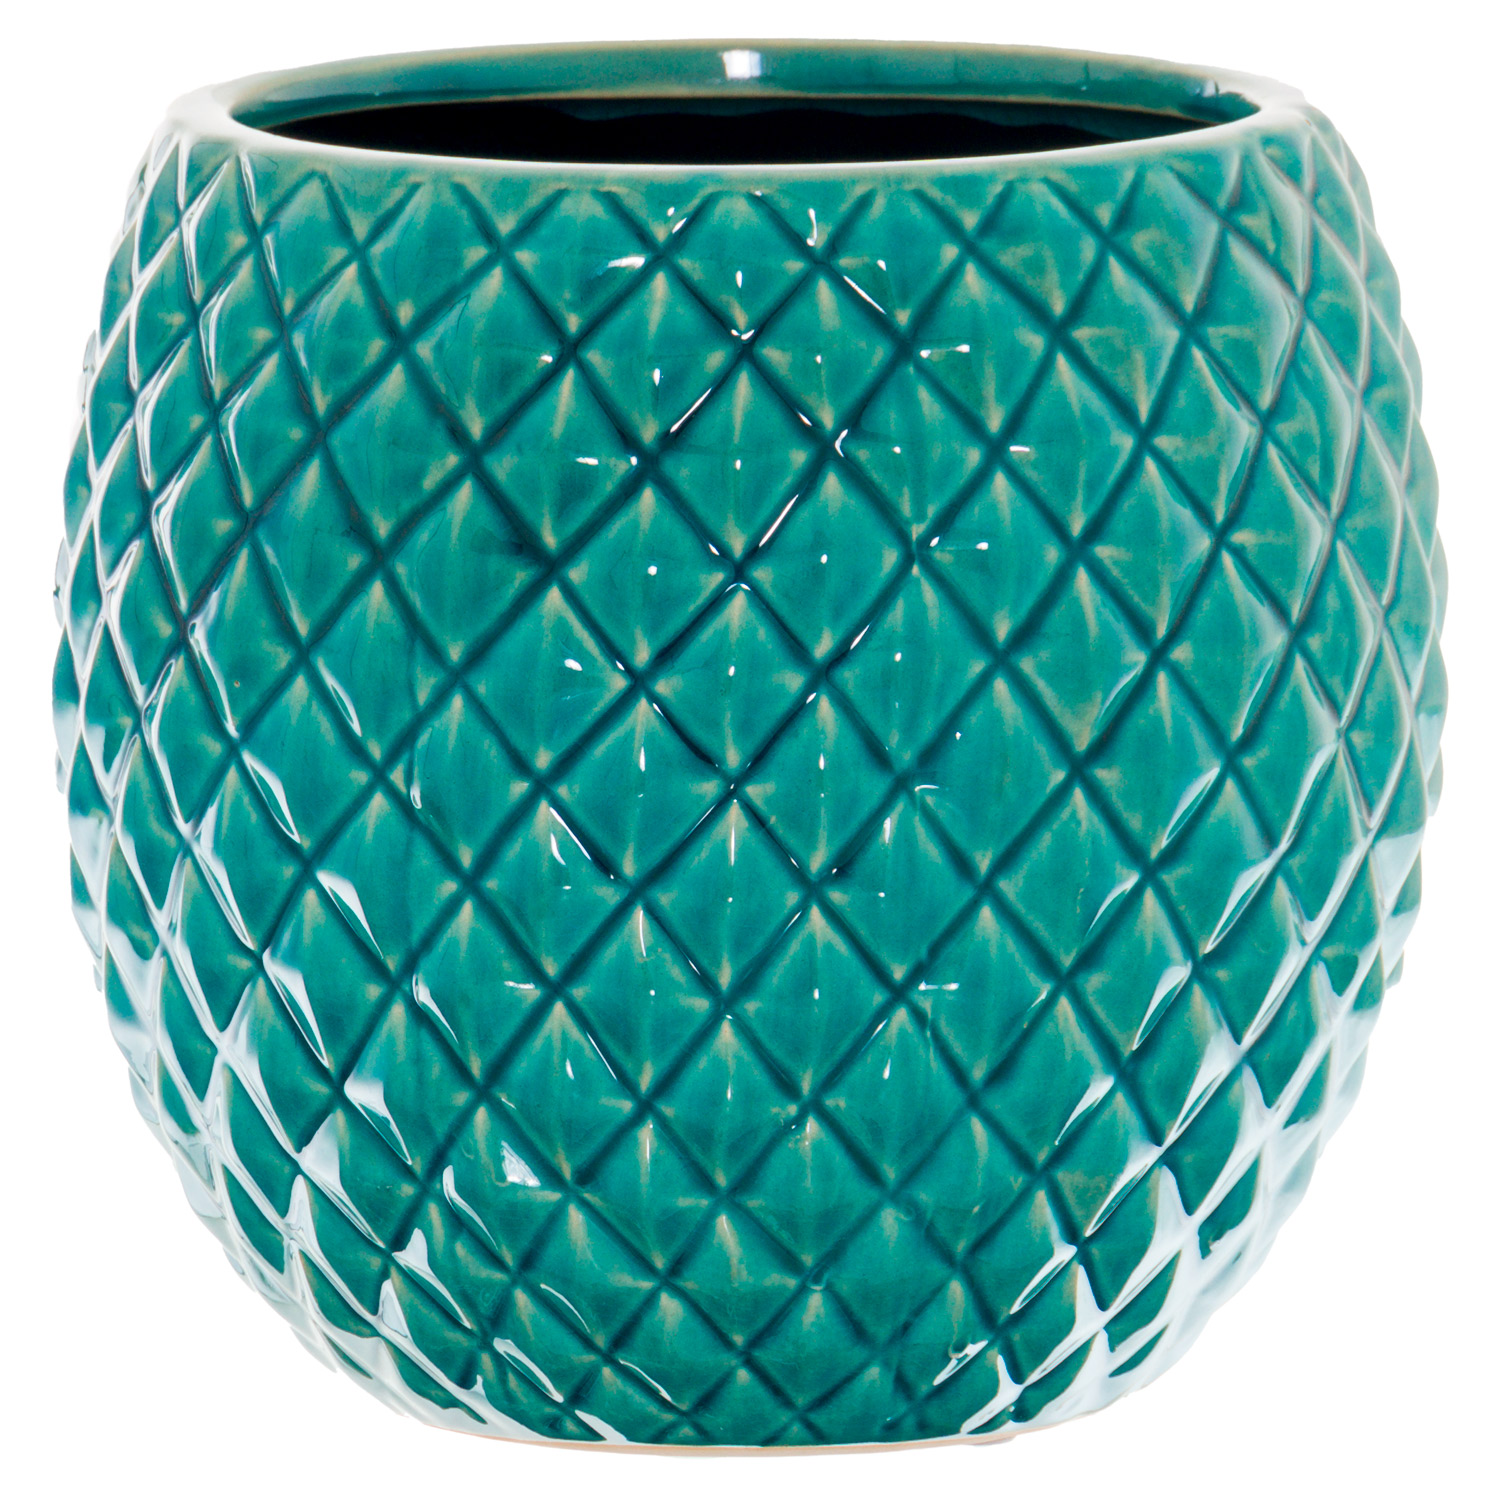 Seville Collection Teal diamond Planter - Image 1